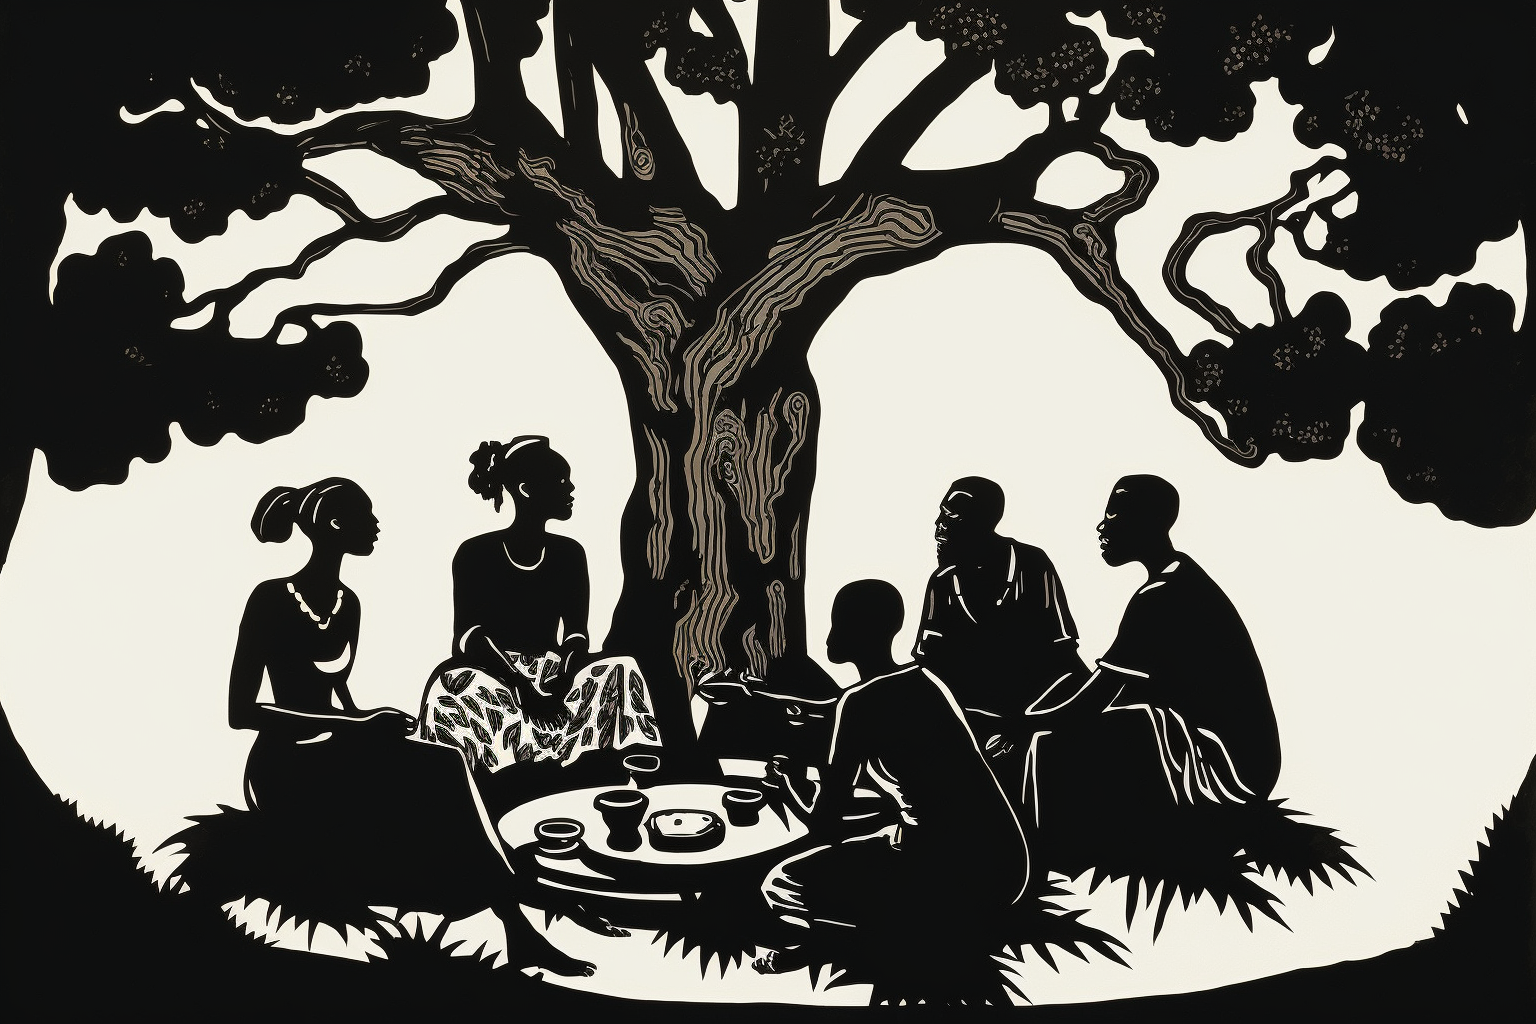 ____hercules_anguish_people_sitting_under_a_tree_and_they_are_black_51f8ccb9-7e5c-4d3e-89c4-1b28f9a4e25e.png